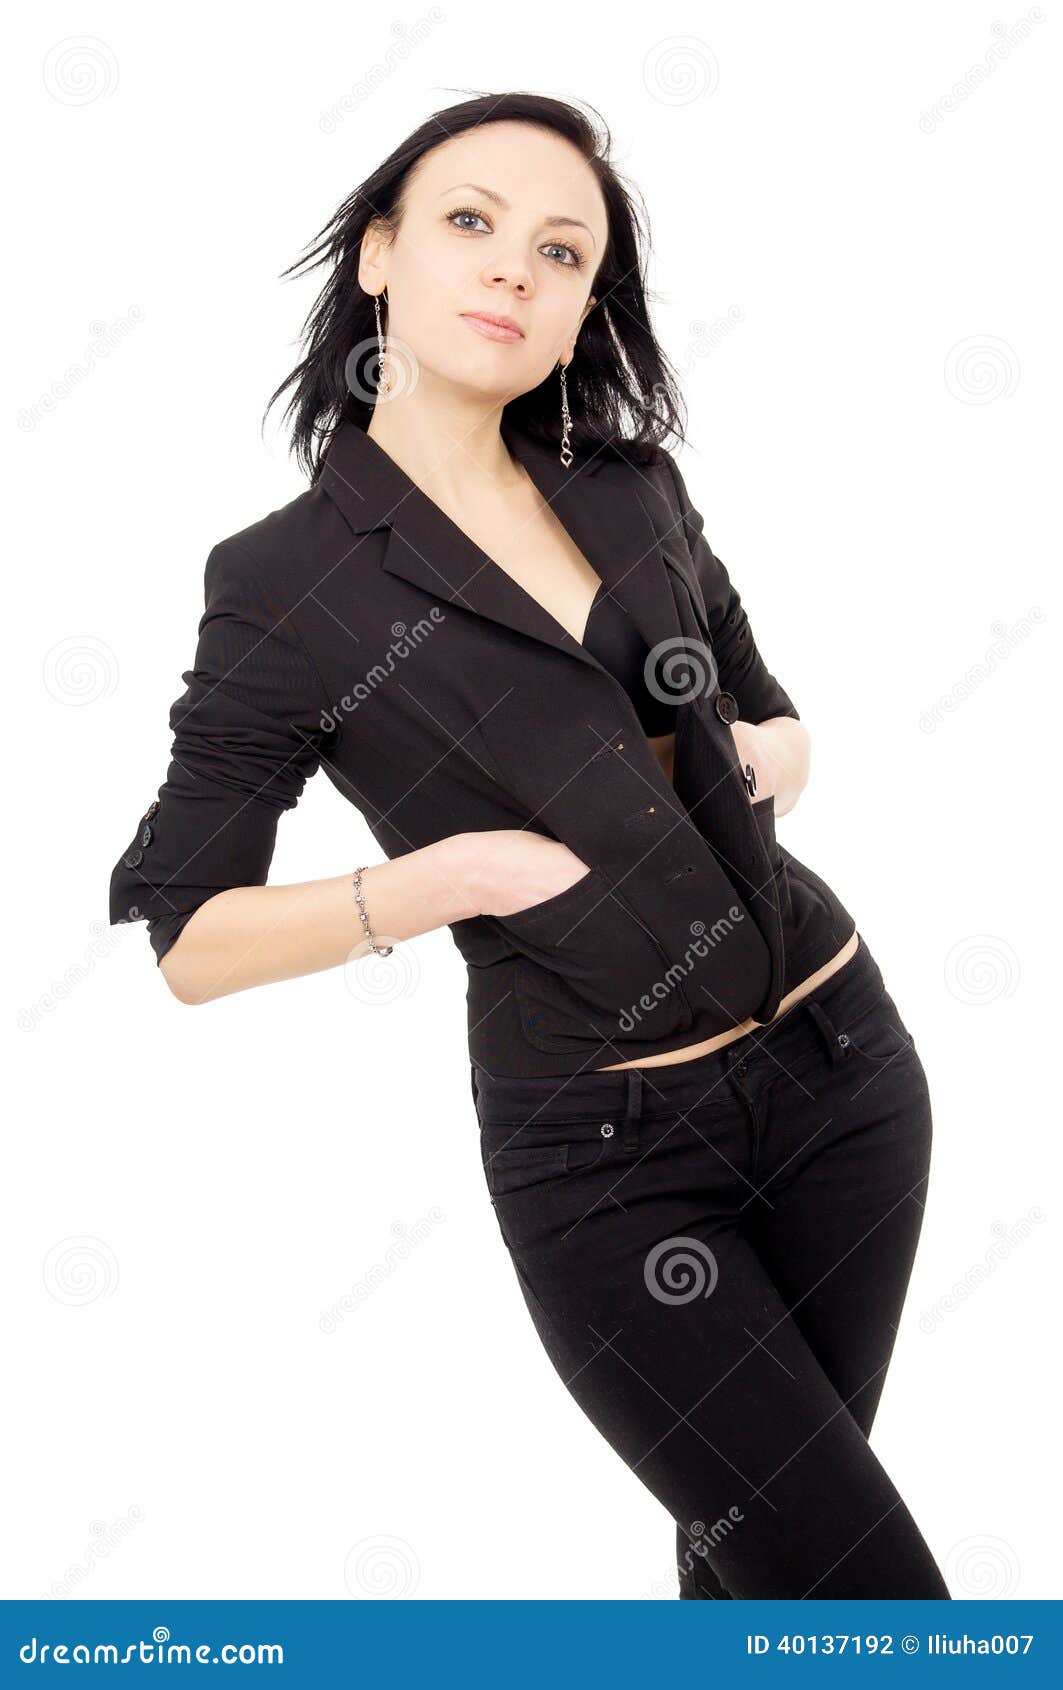 Beautiful Girl in Black Suit Isolated Stock Photo - Image of confident ...